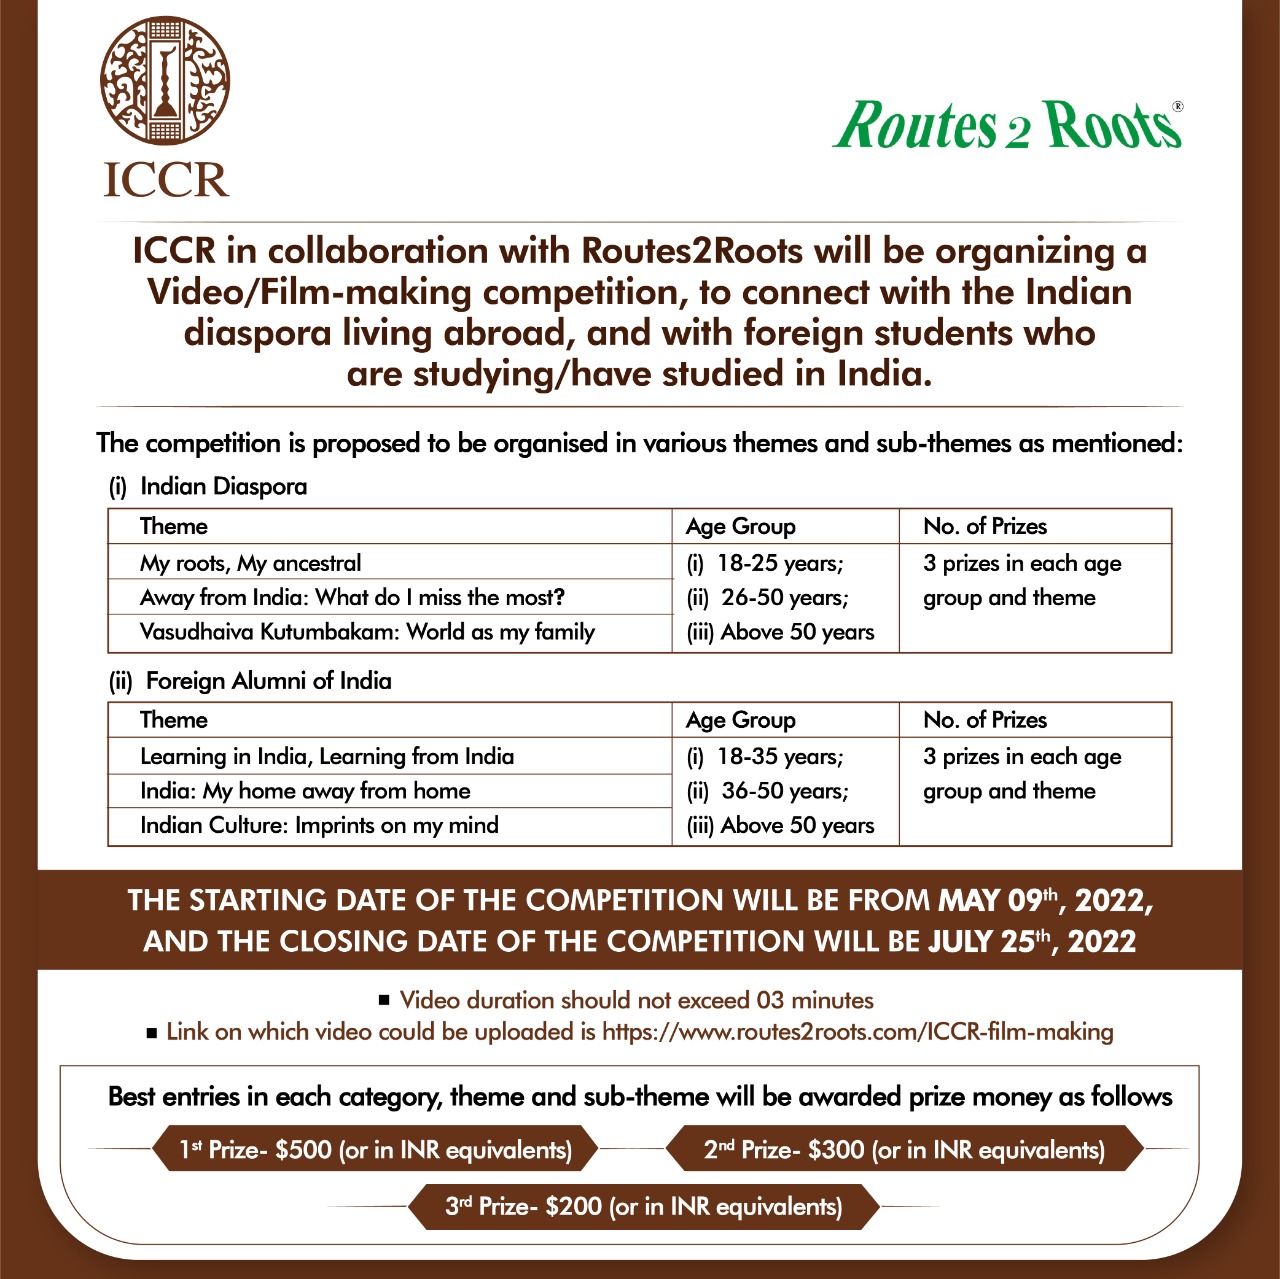 International Video/Film Making Competition 2022 organized by ICCR in collaboration with Routes2Roots